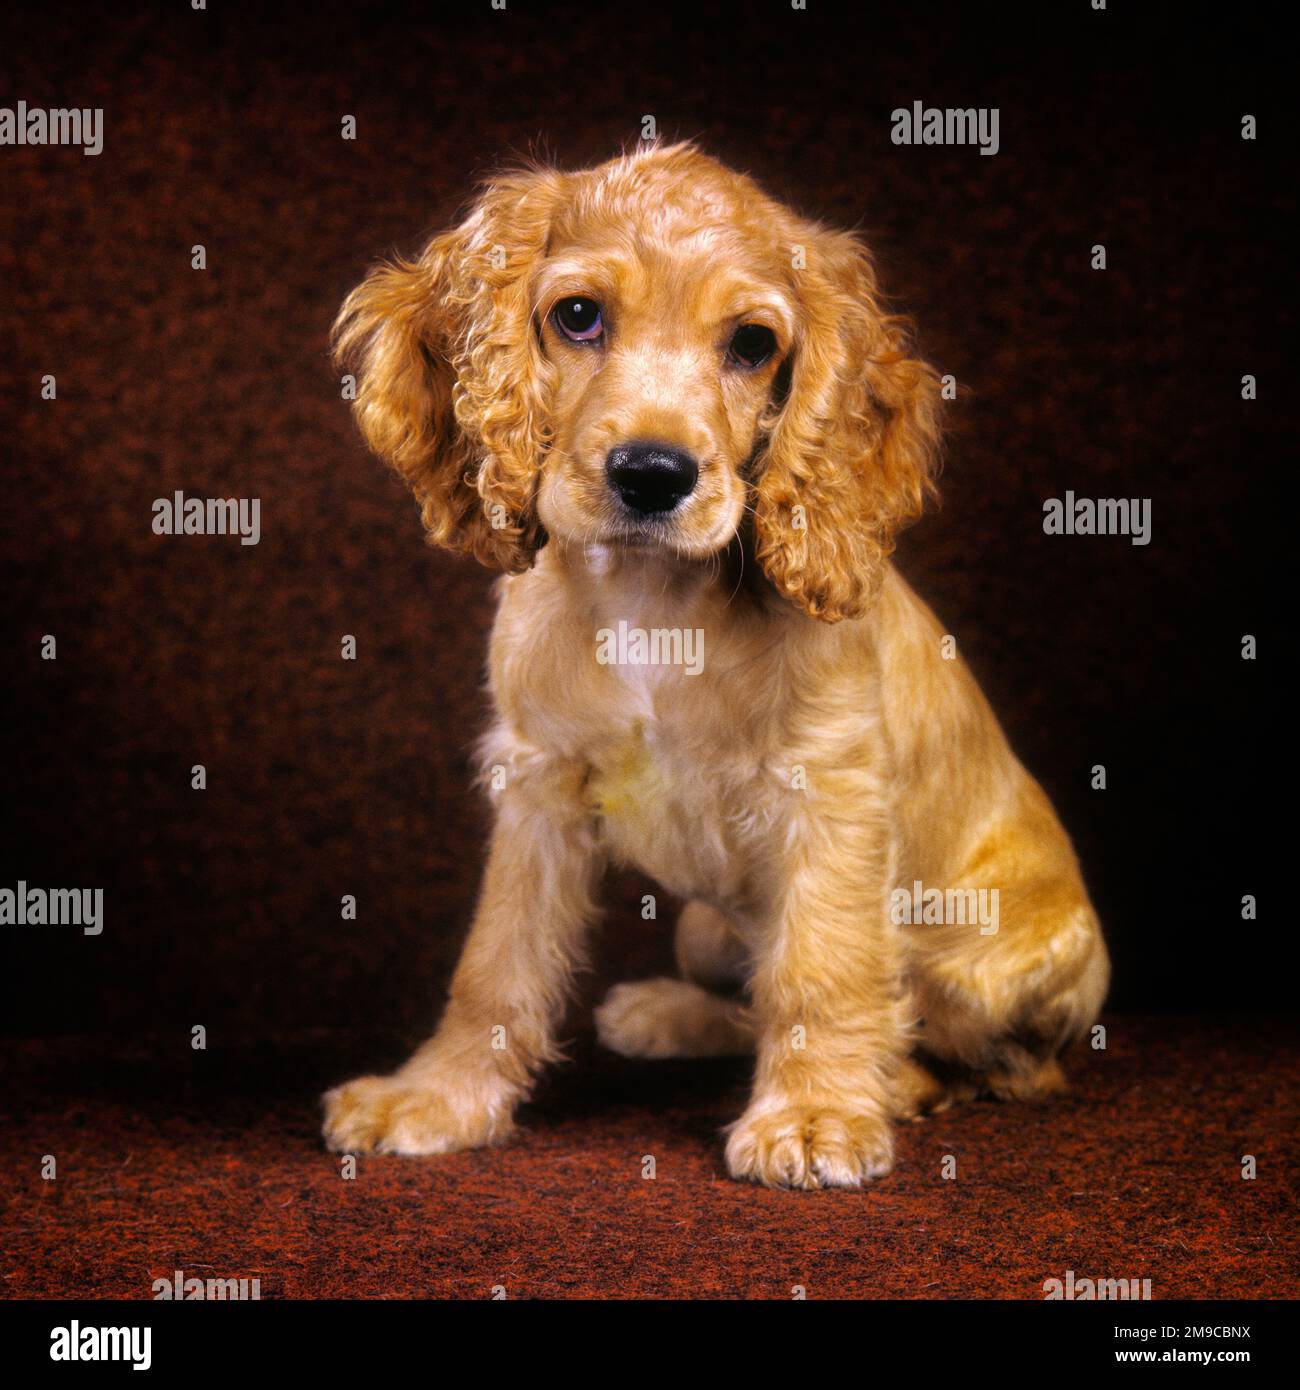 1990s A SAD FACED ORANGE ROAN COLORED COCKER SPANIEL PUPPY LOOKING AT CAMERA - kd5591 HFF002 HARS EYE CONTACT TEMPTATION MAMMALS CANINES CHOICE RECREATION MOOD POOCH CONCEPTUAL GLUM COLORED CANINE FACED GROWTH MAMMAL MISERABLE ROAN WISTFUL OLD FASHIONED Stock Photo